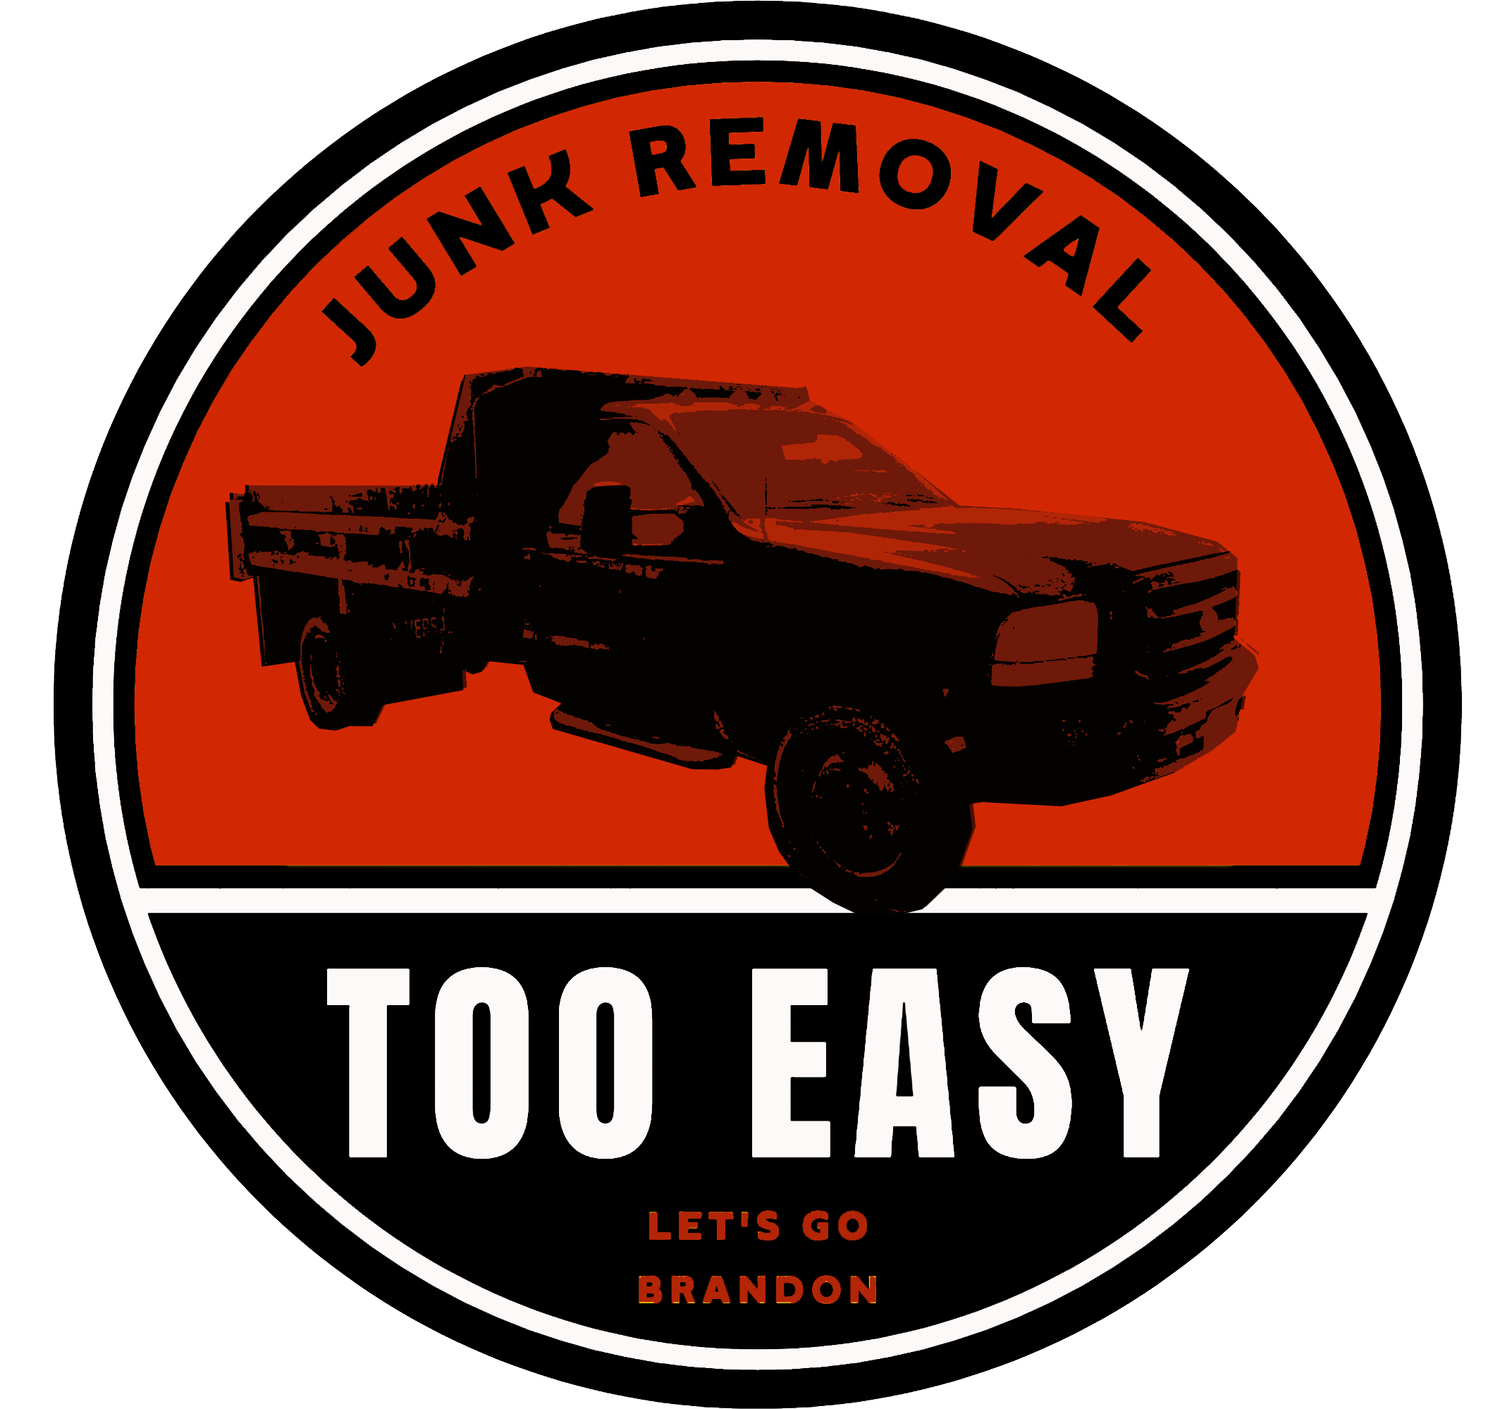 TOO EASY Junk Removal